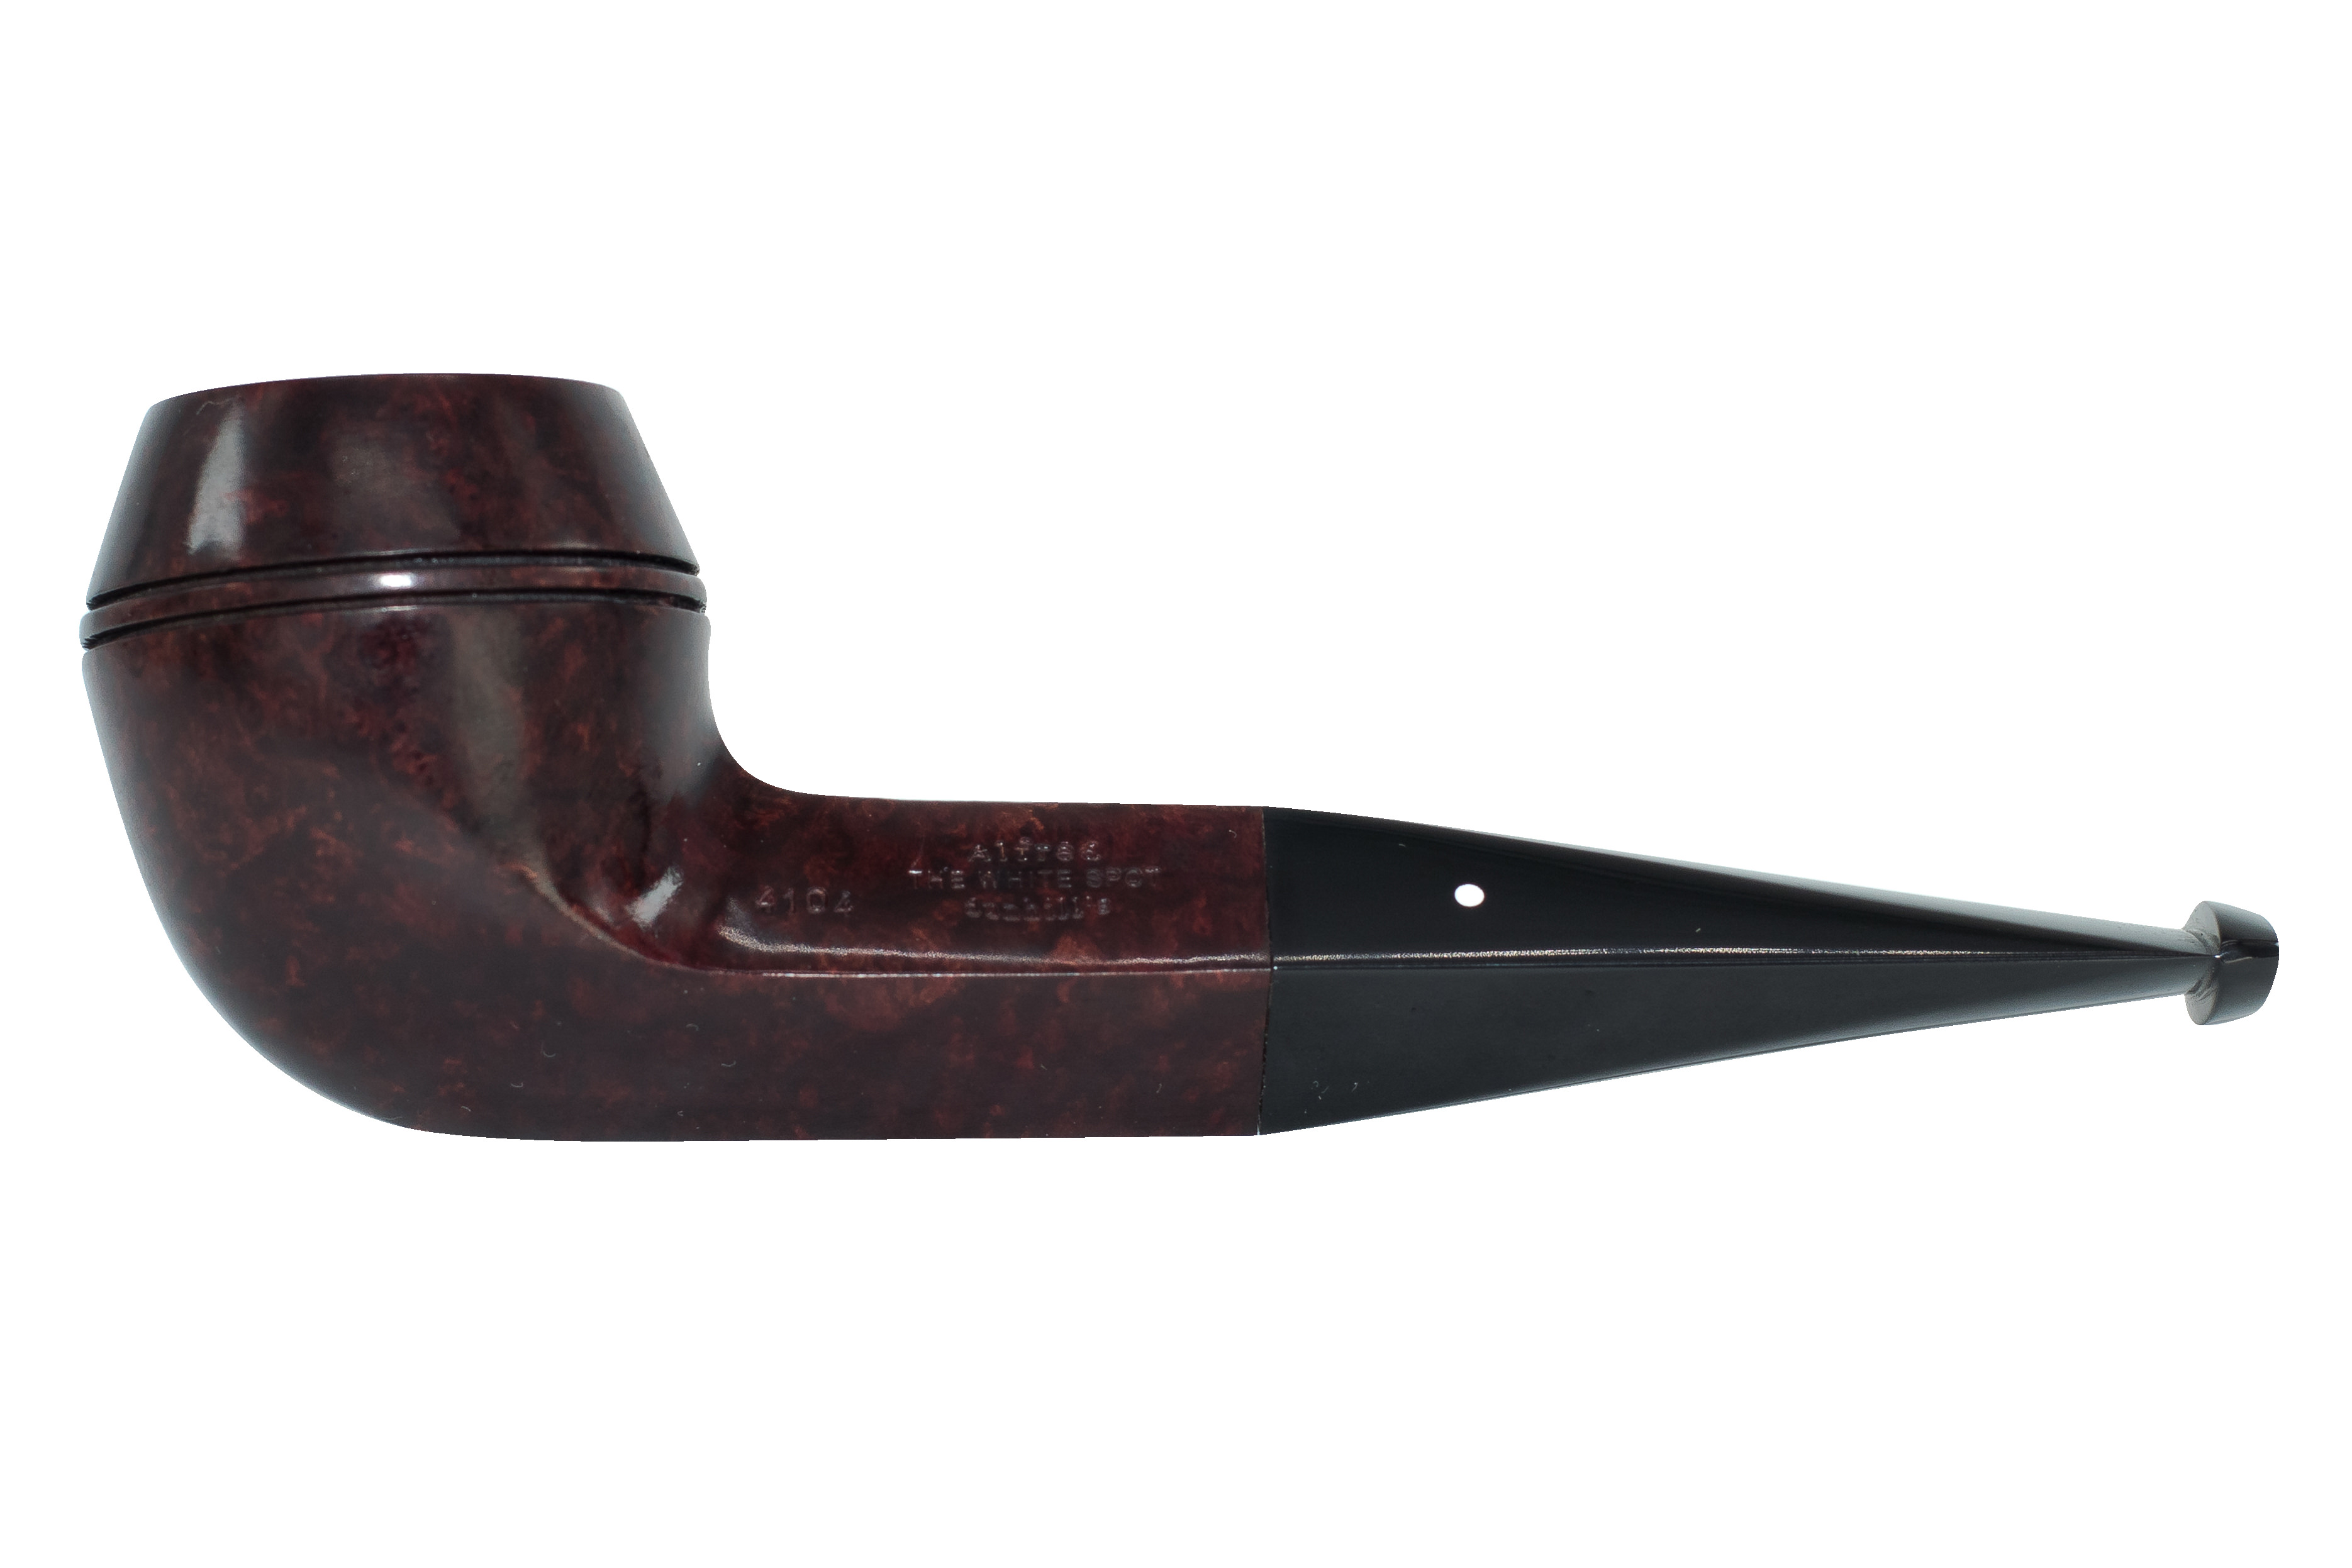 https://www.tobaccopipes.com/dunhill-bruyere/